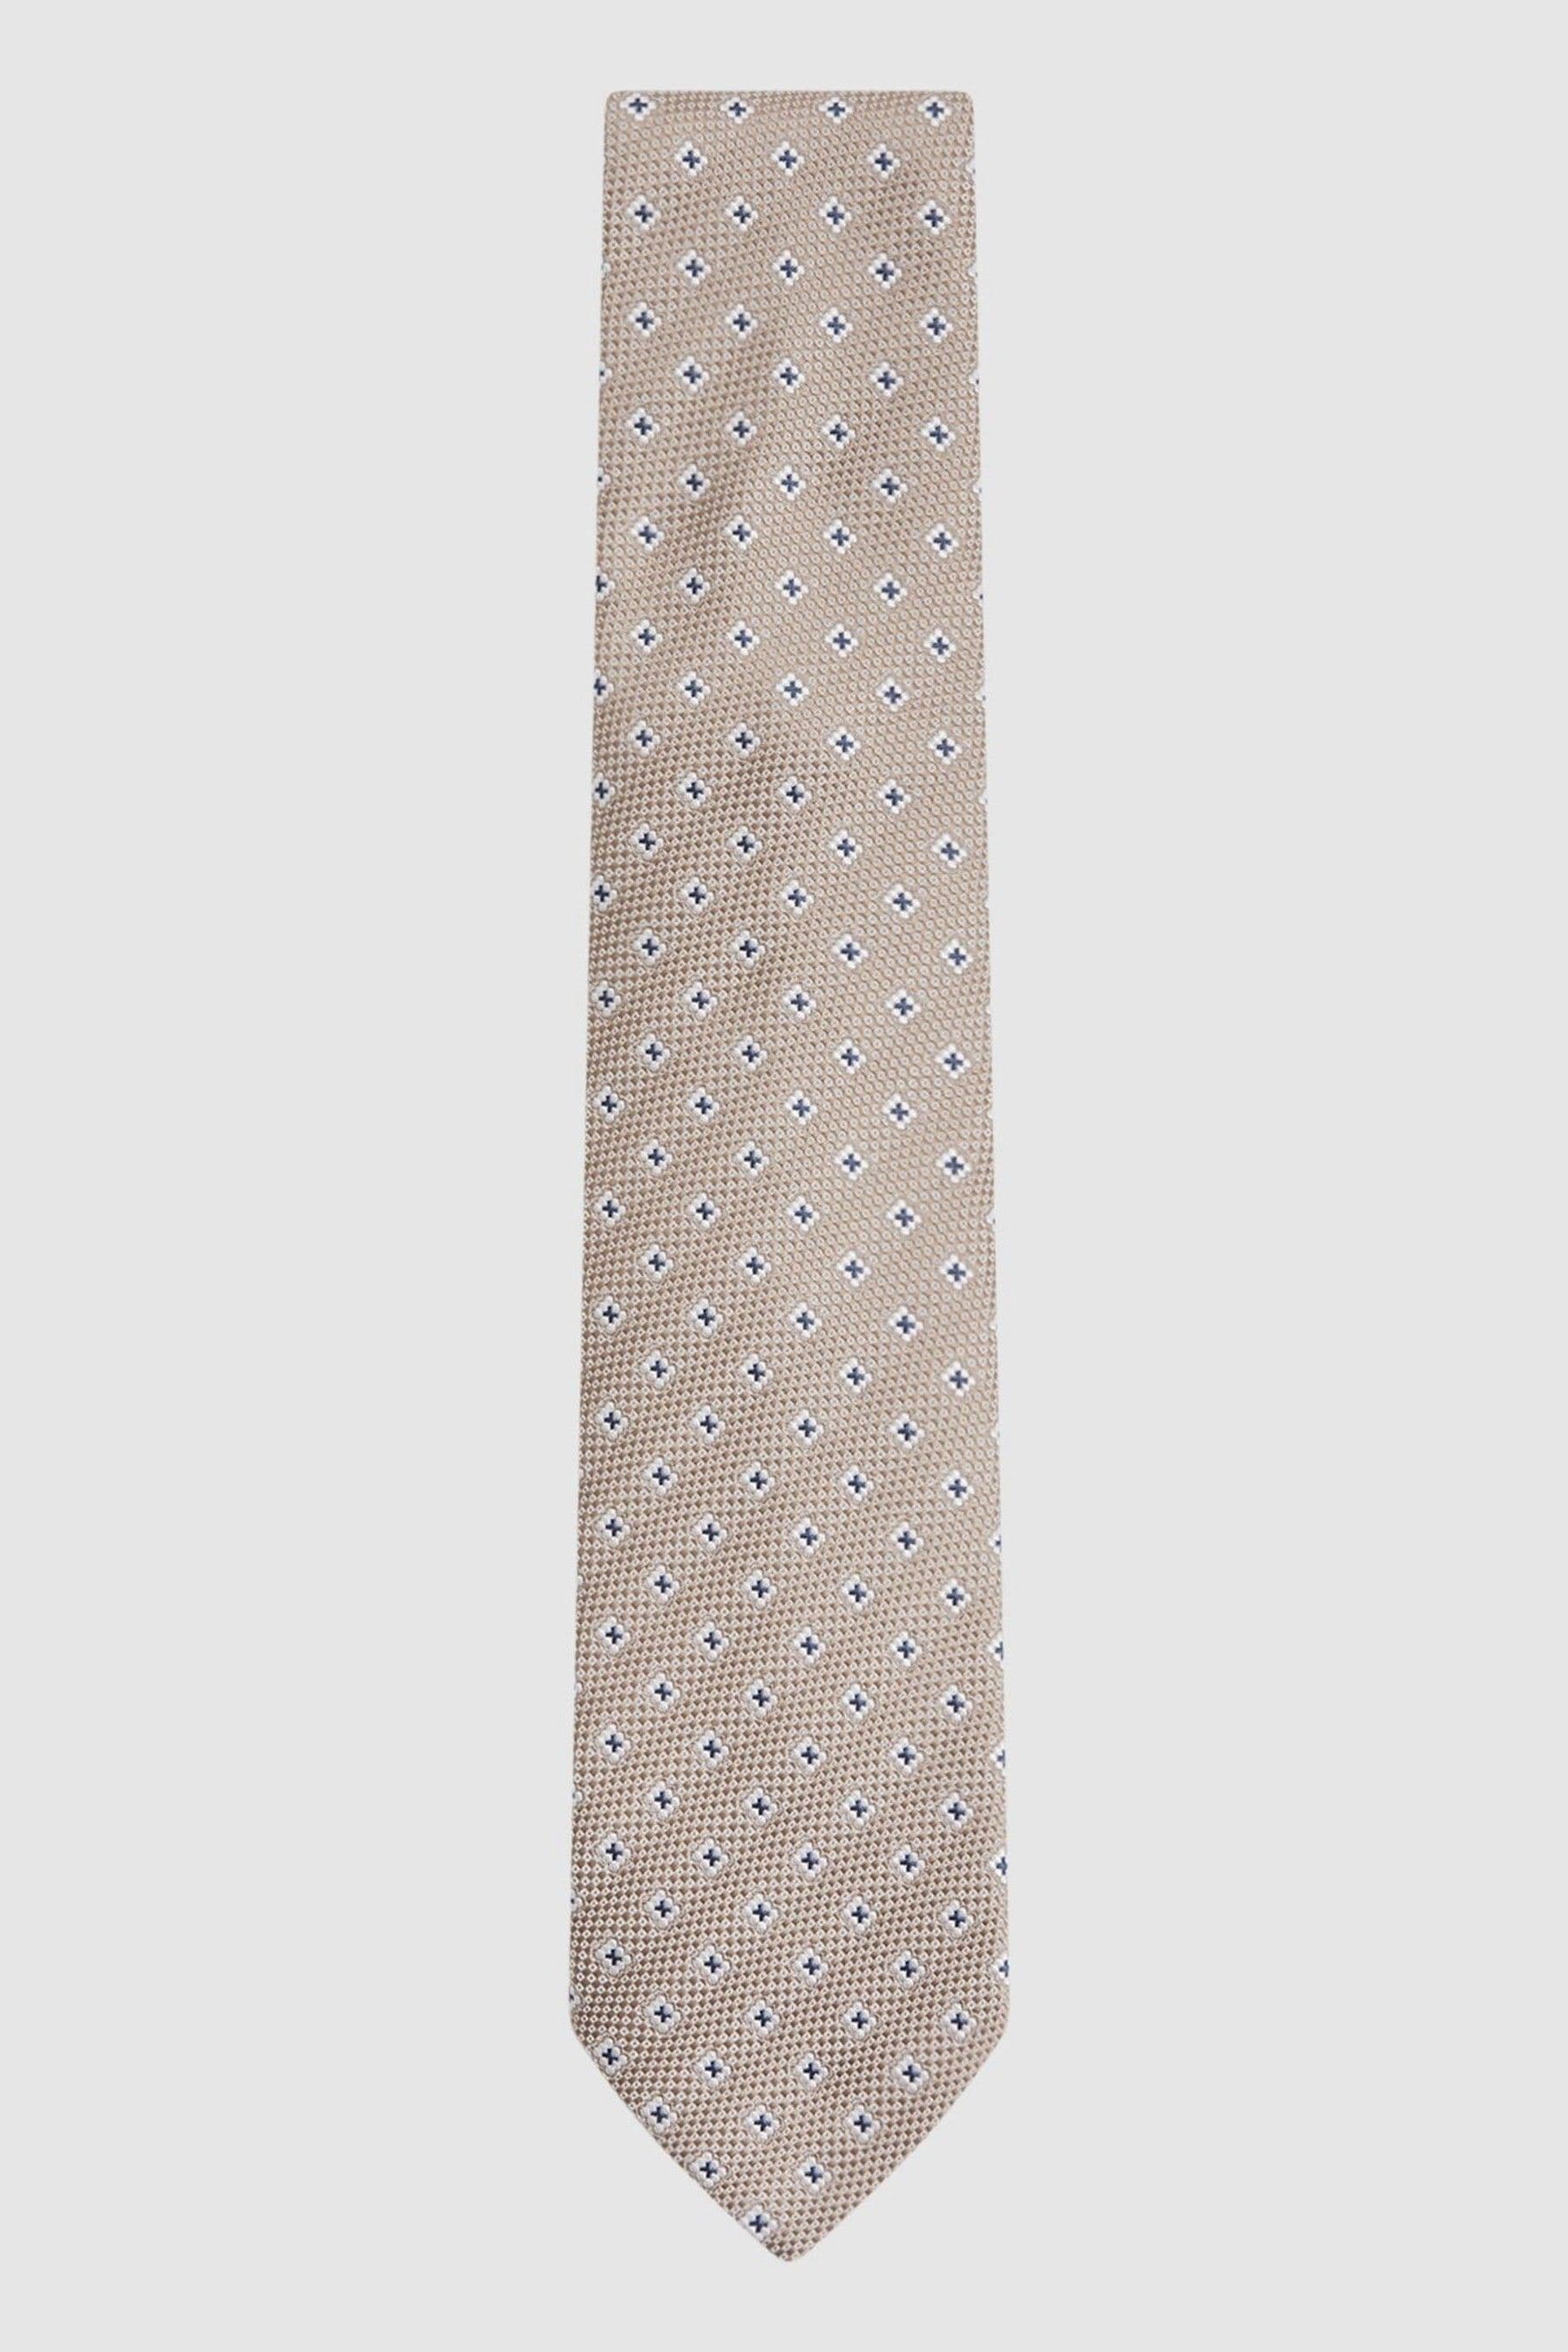 Reiss Apollinare - Oatmeal Silk Blend Floral Print Tie, In Neutral